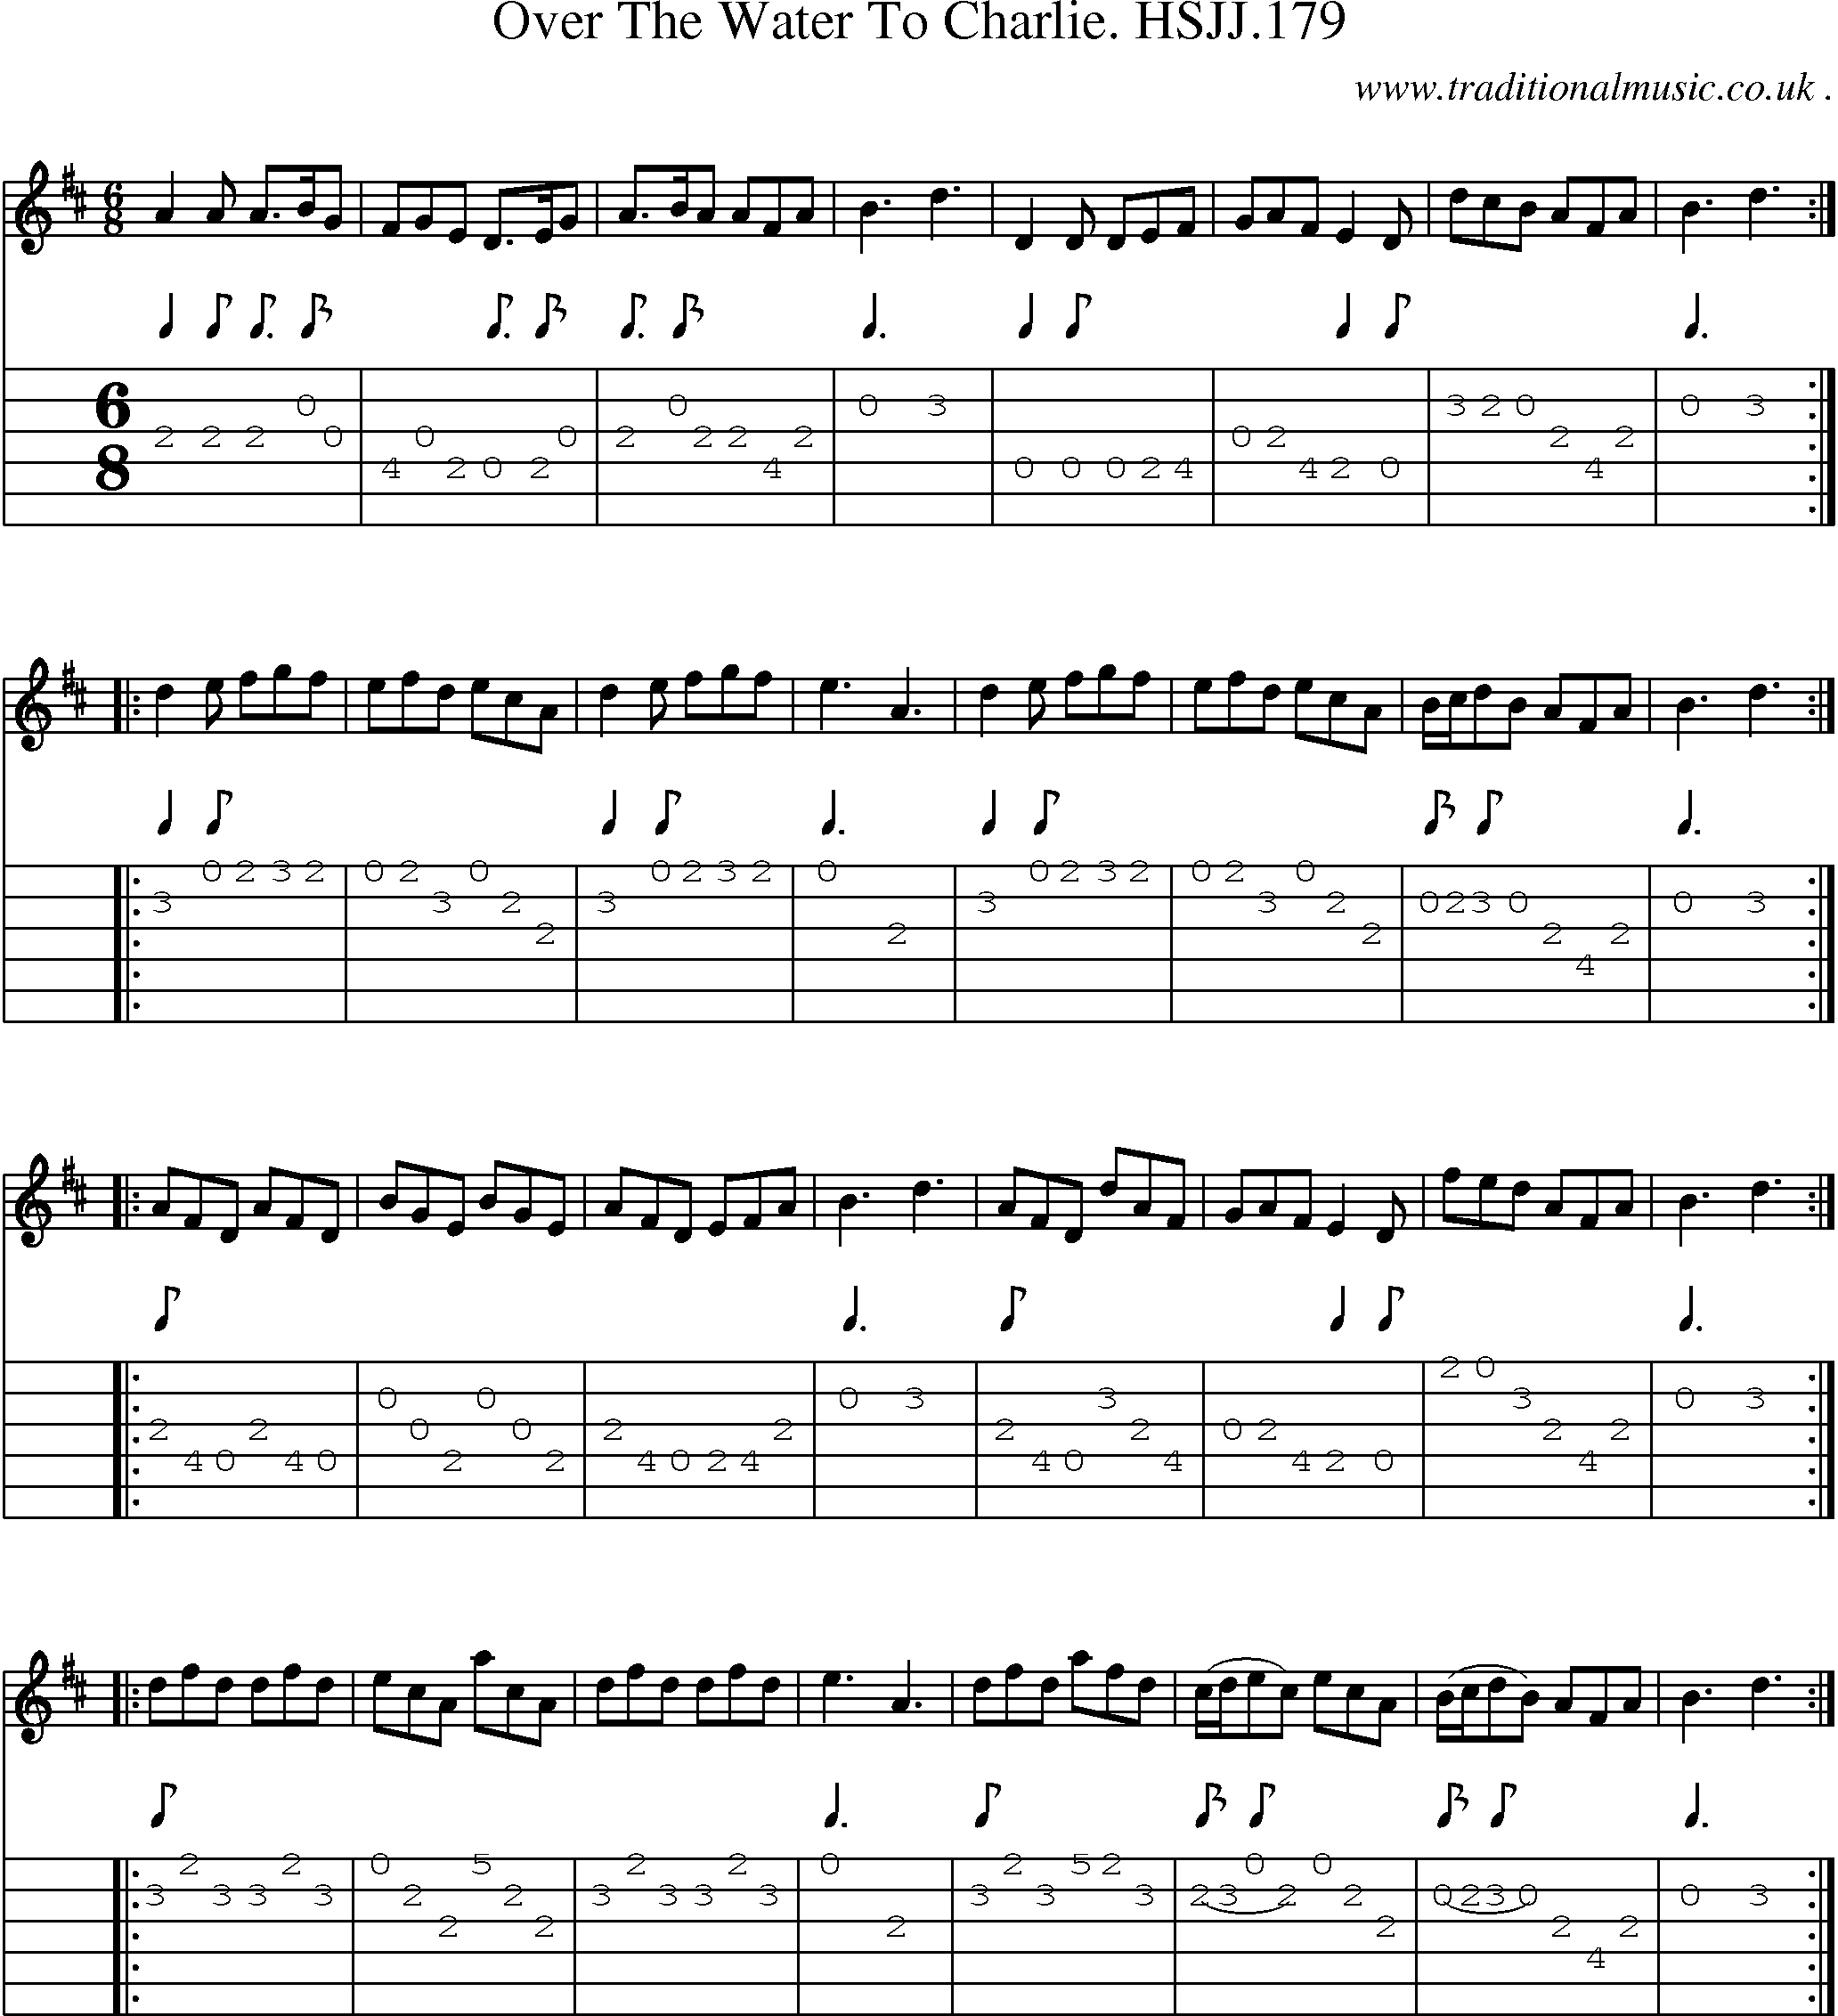 Sheet-music  score, Chords and Guitar Tabs for Over The Water To Charlie Hsjj179